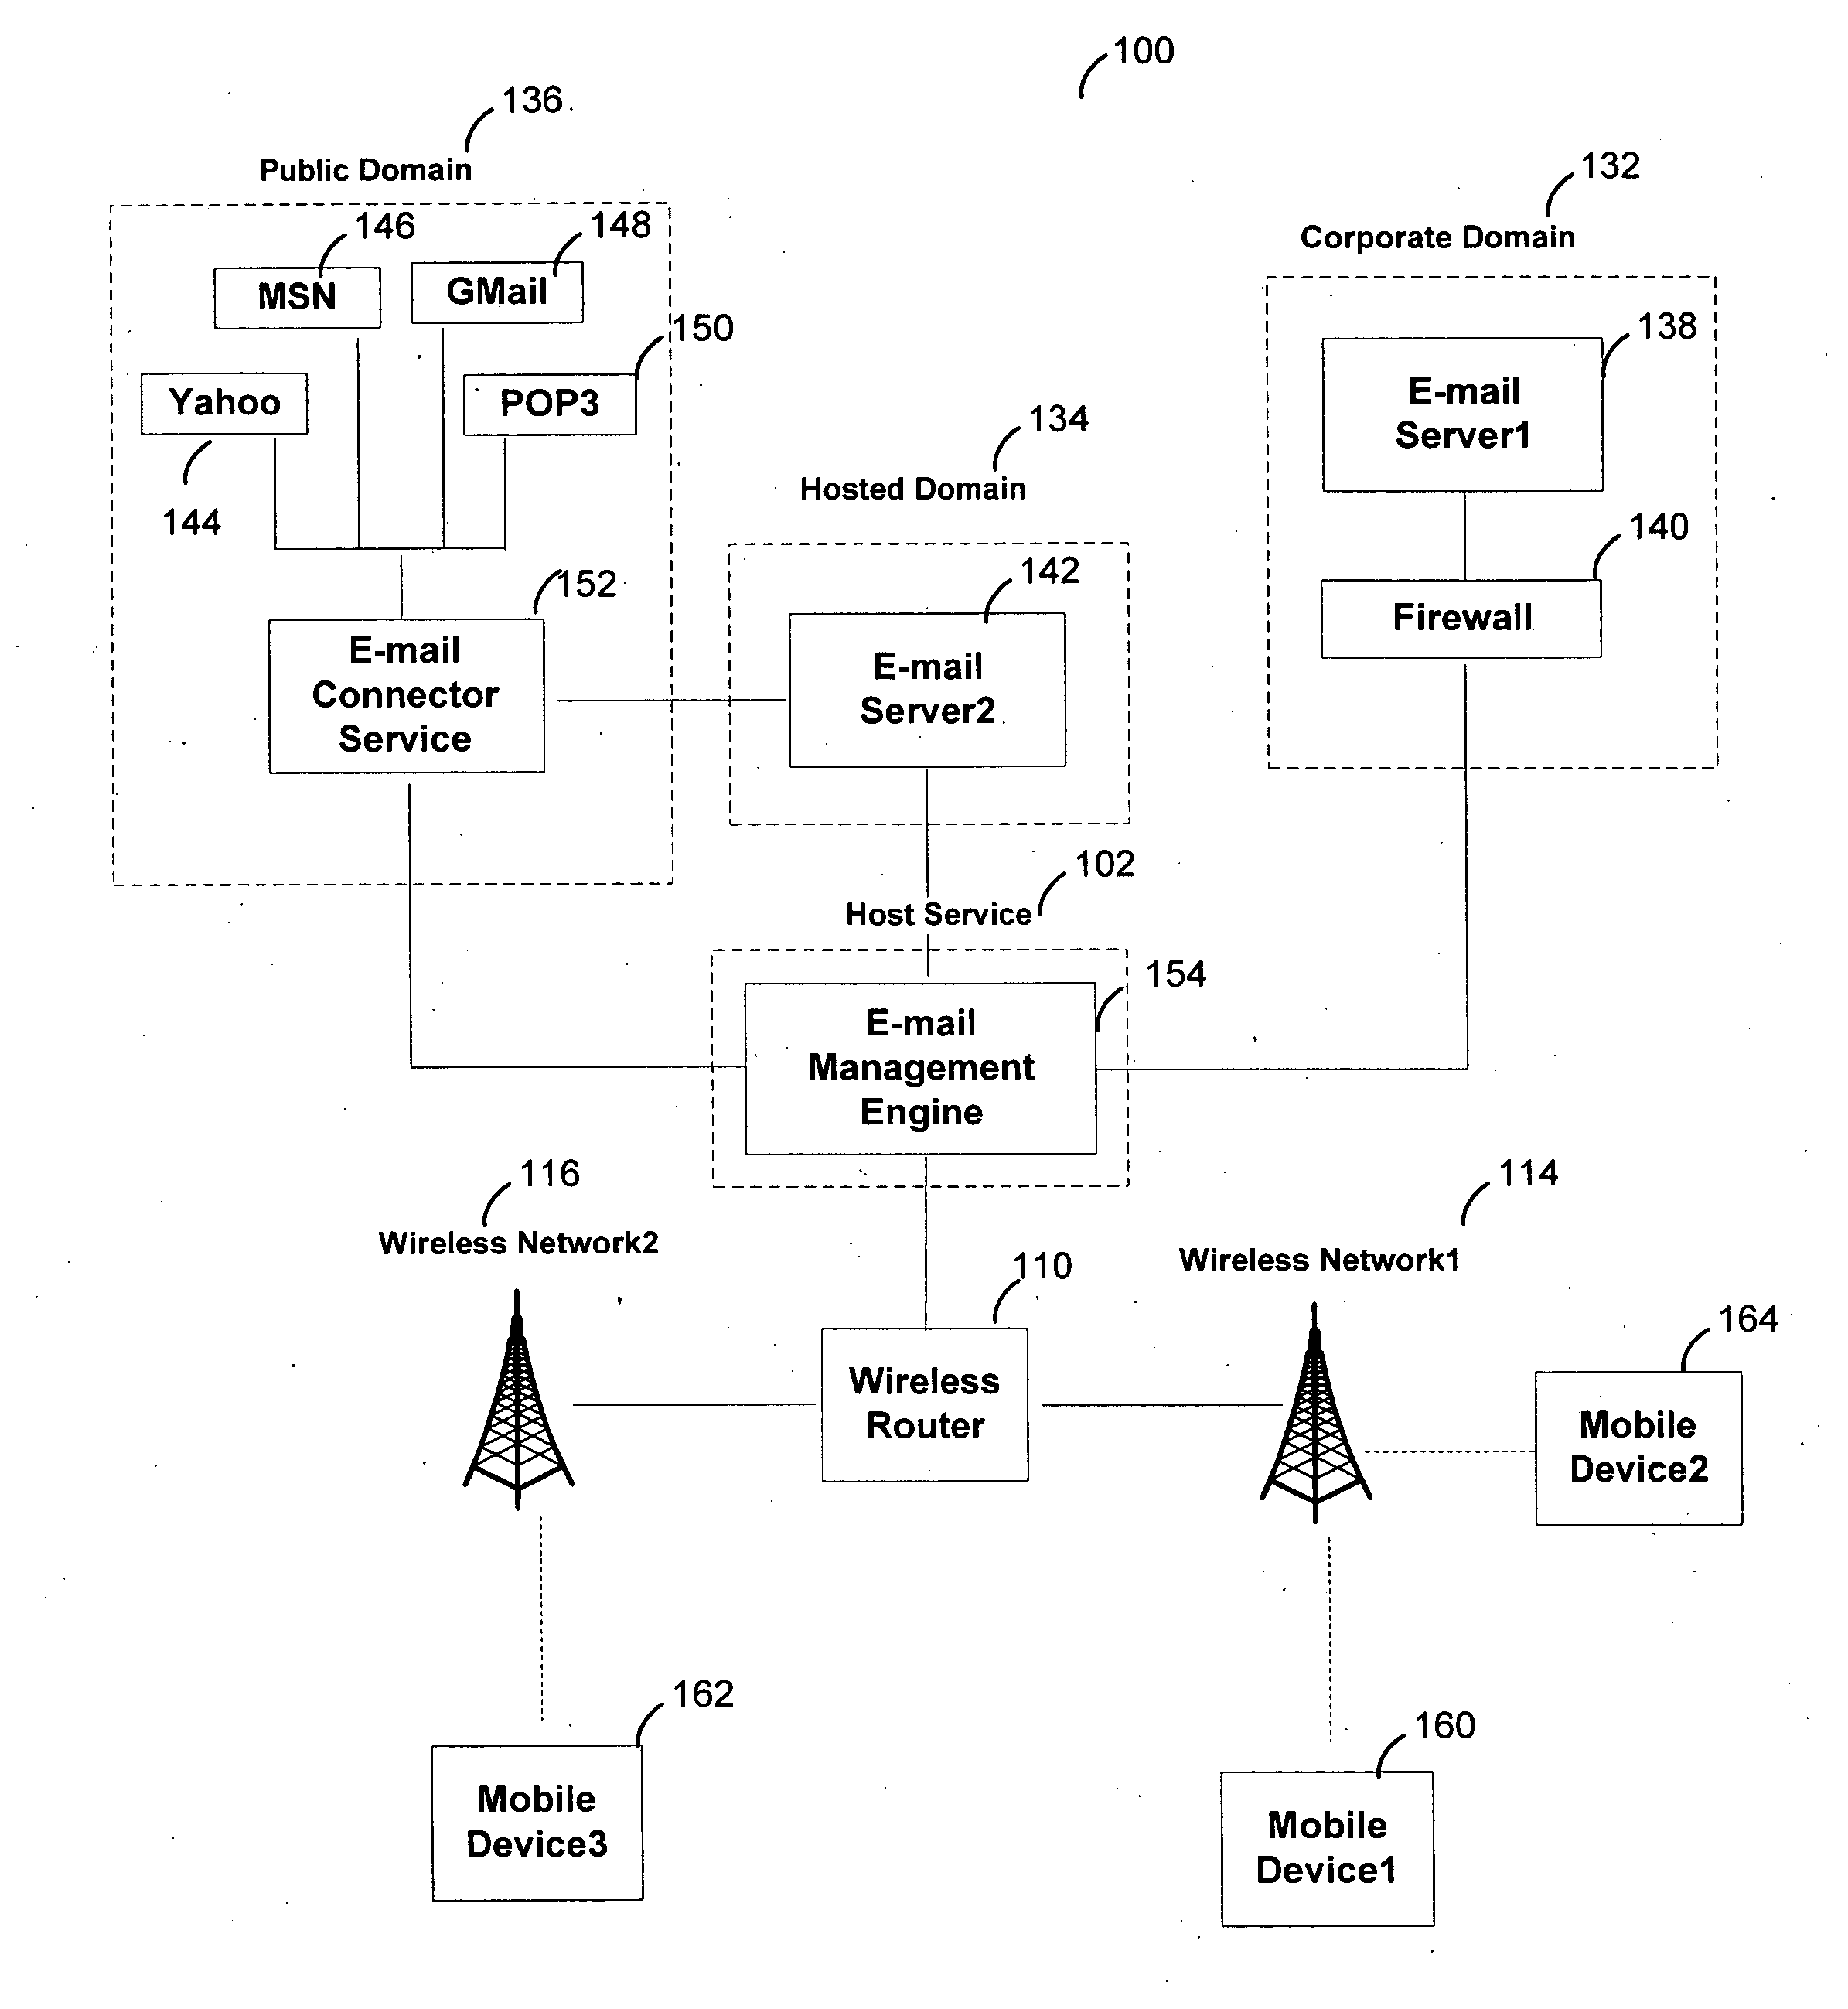 Wireless messaging using notification messages in a wireless communication network